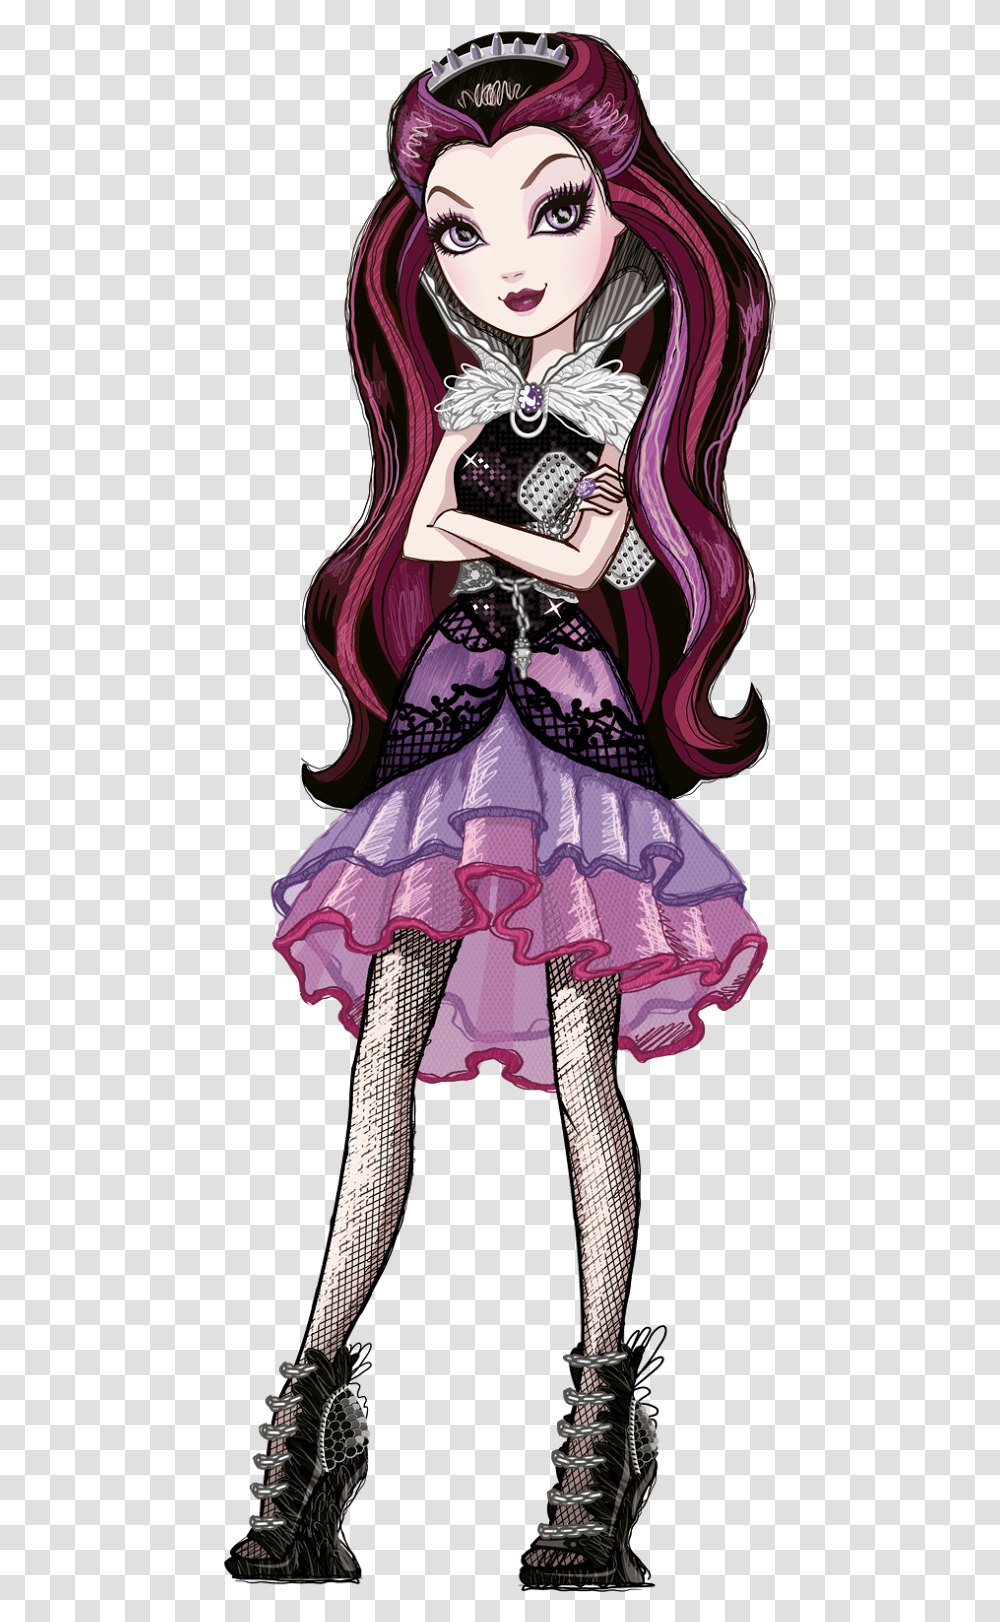 Library Of Raven Halloween Jpg Black And White Download Ever After High Raven Queen, Clothing, Doll, Toy, Person Transparent Png